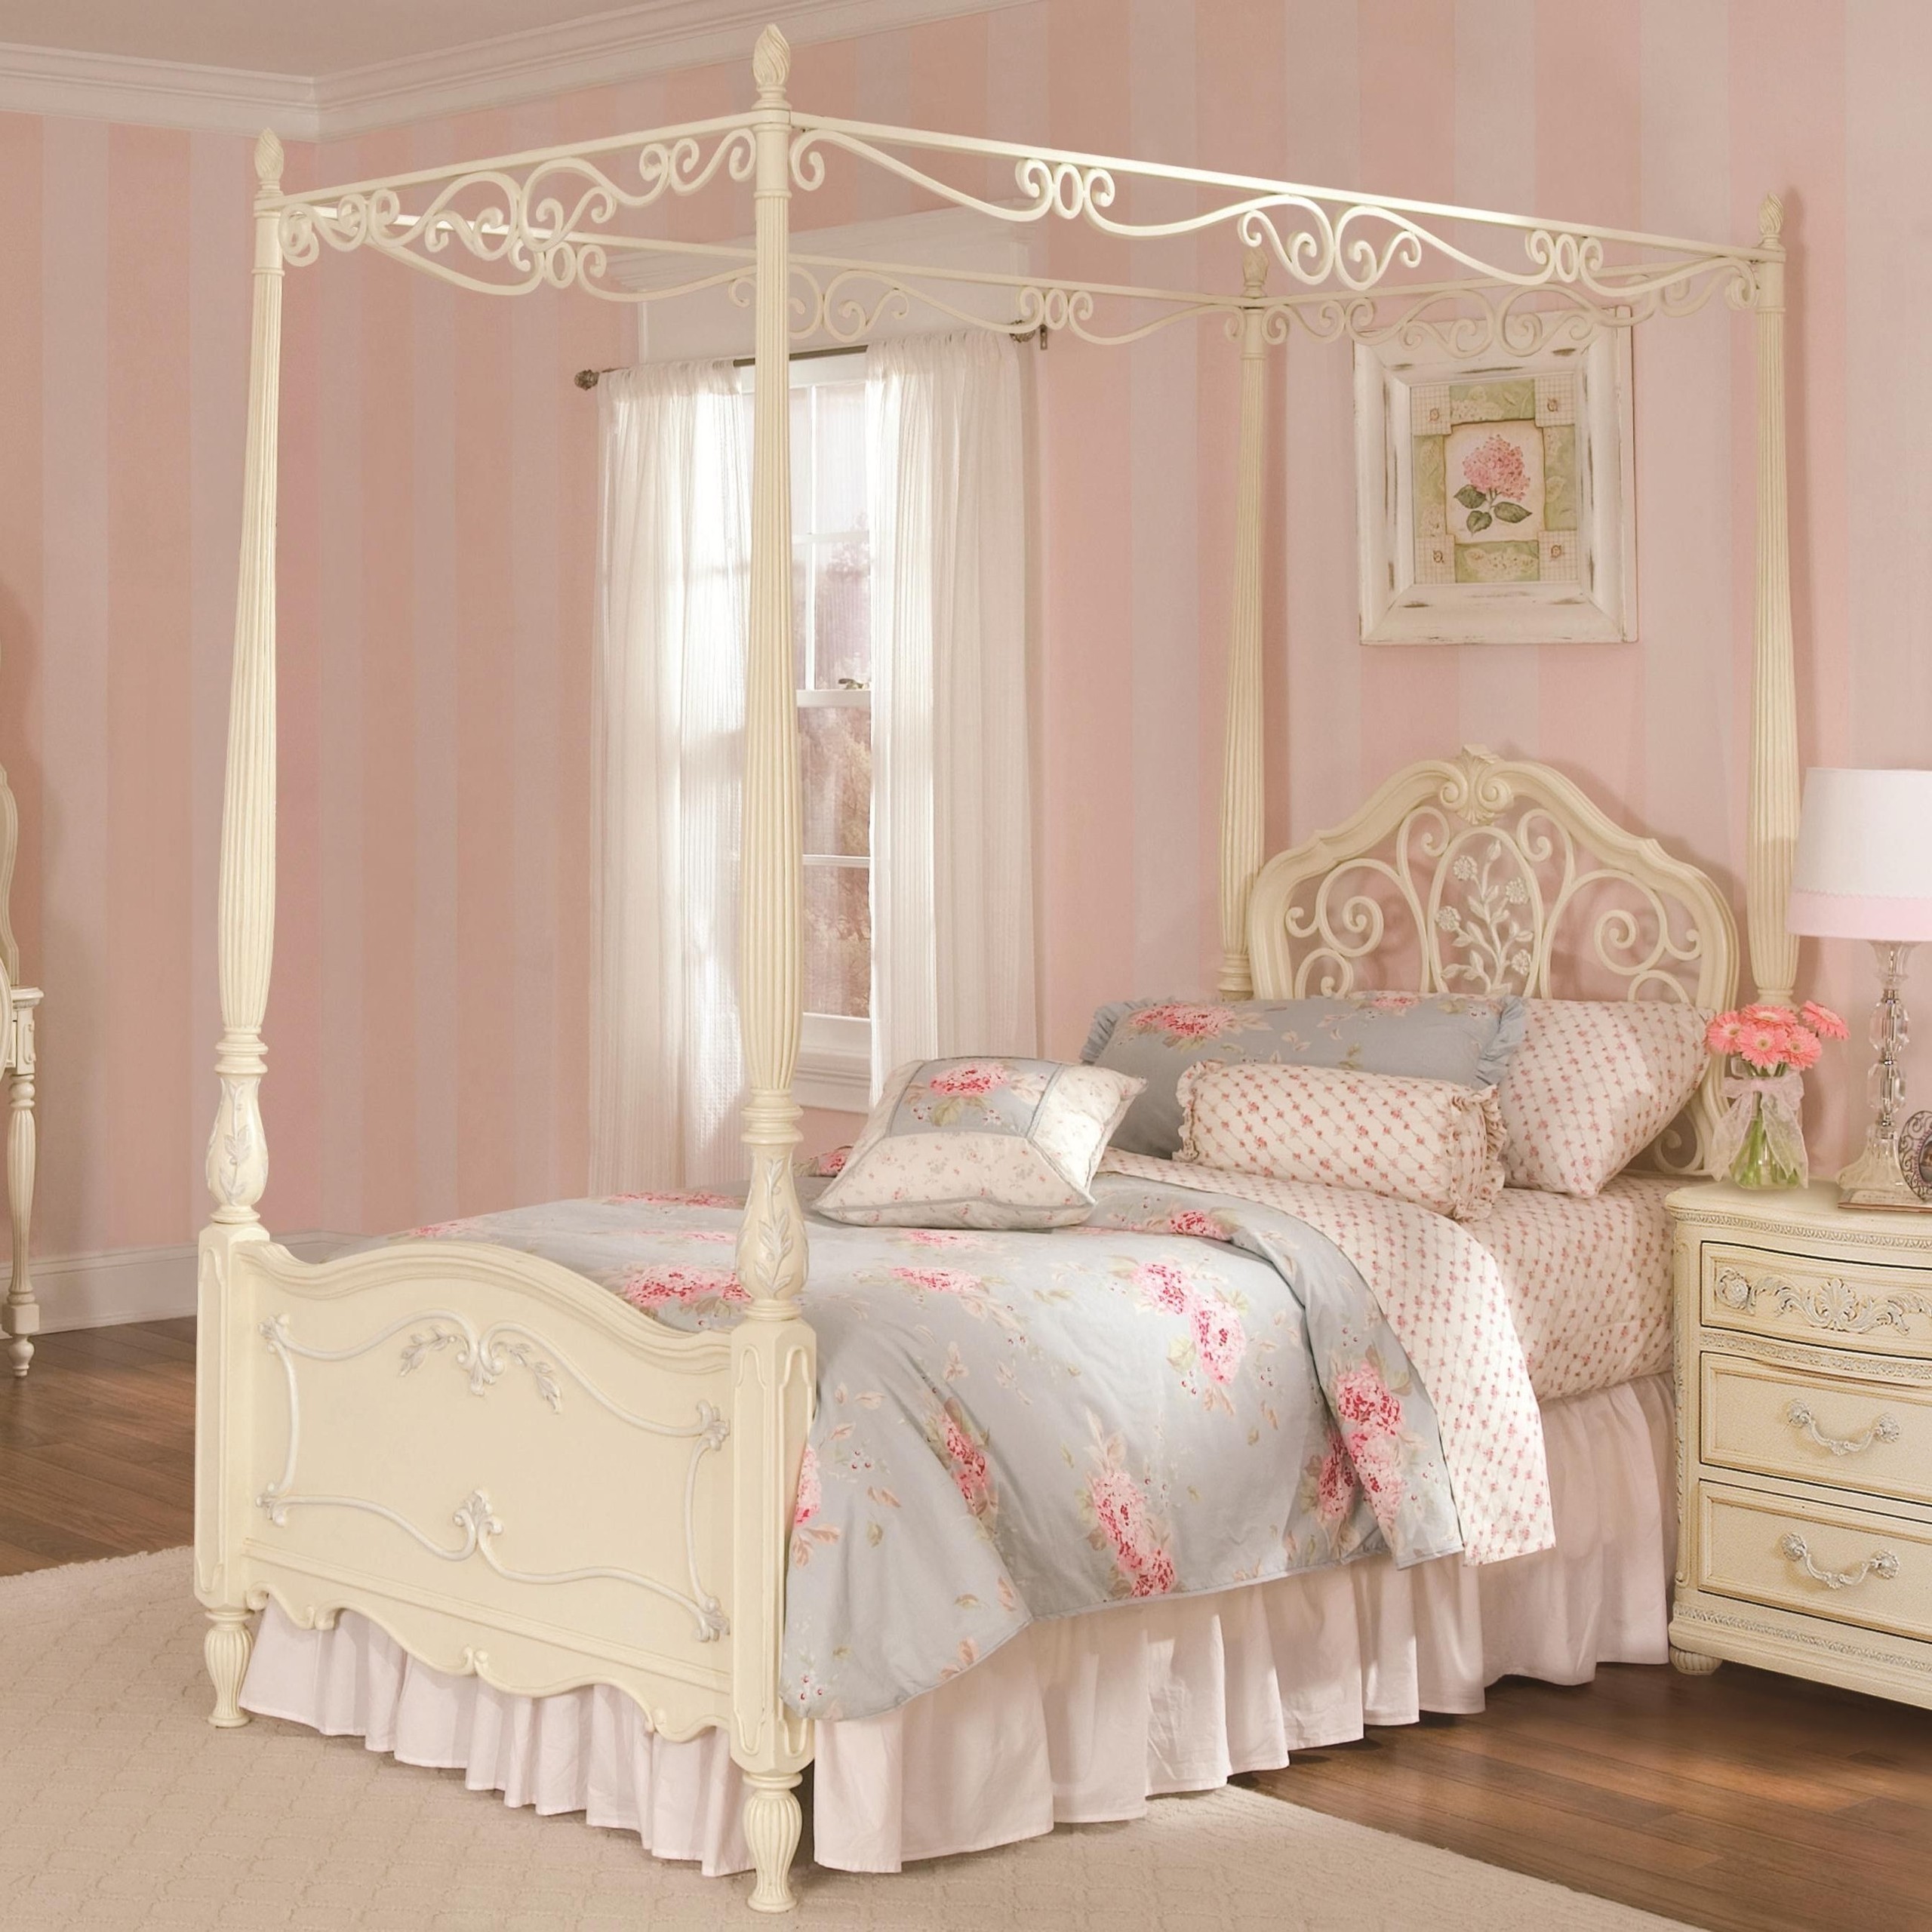 Amazing full size canopy bed girls bed canopy bedroom